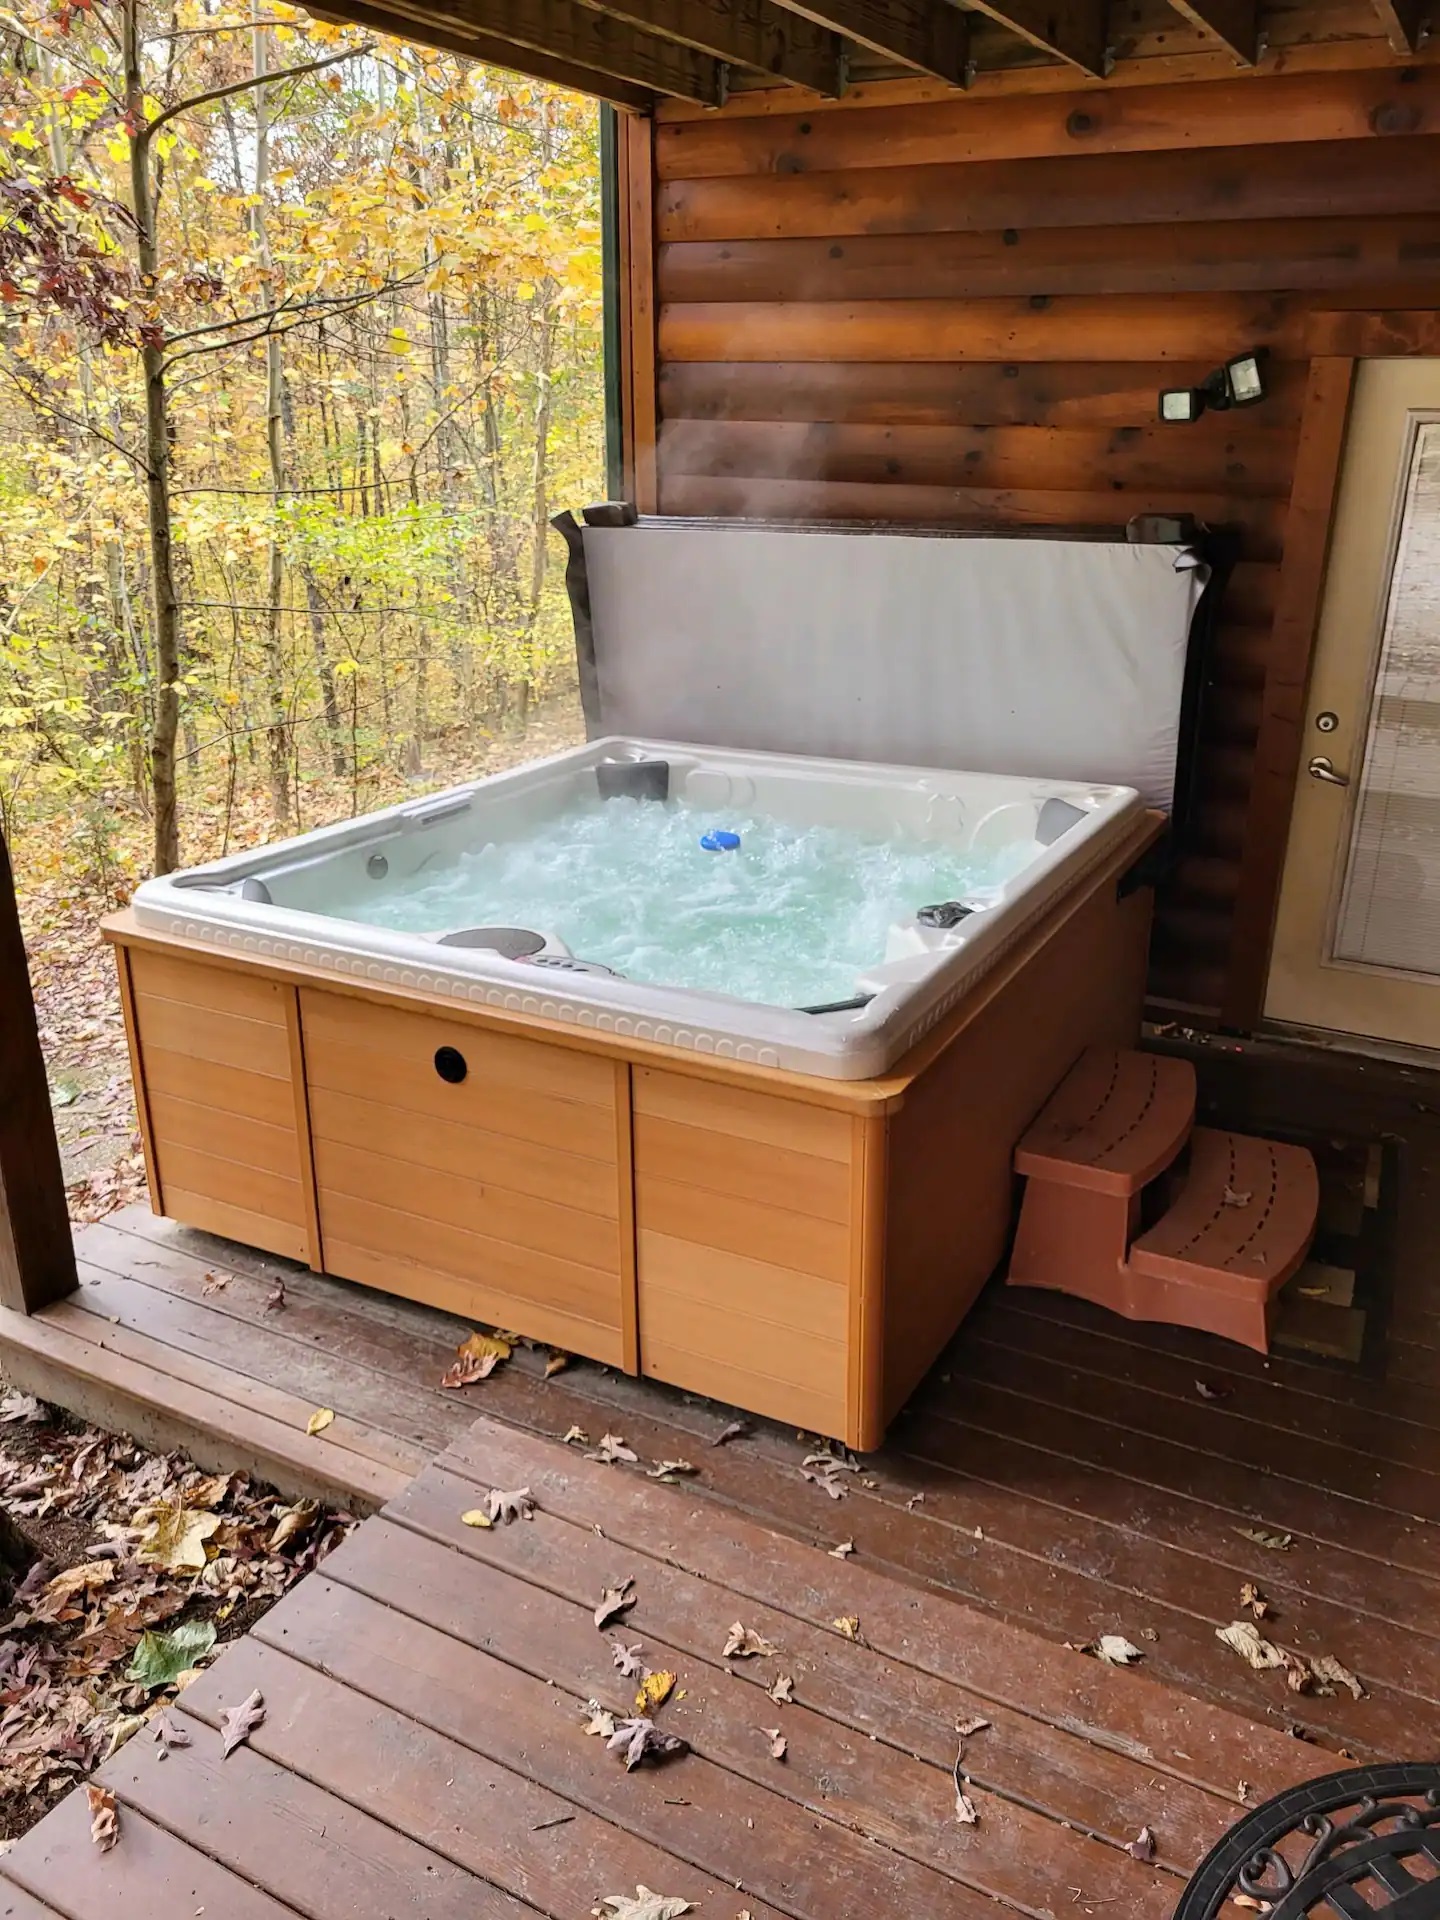 Fairytale Log Cabin jacuzzi on the porch outside the home